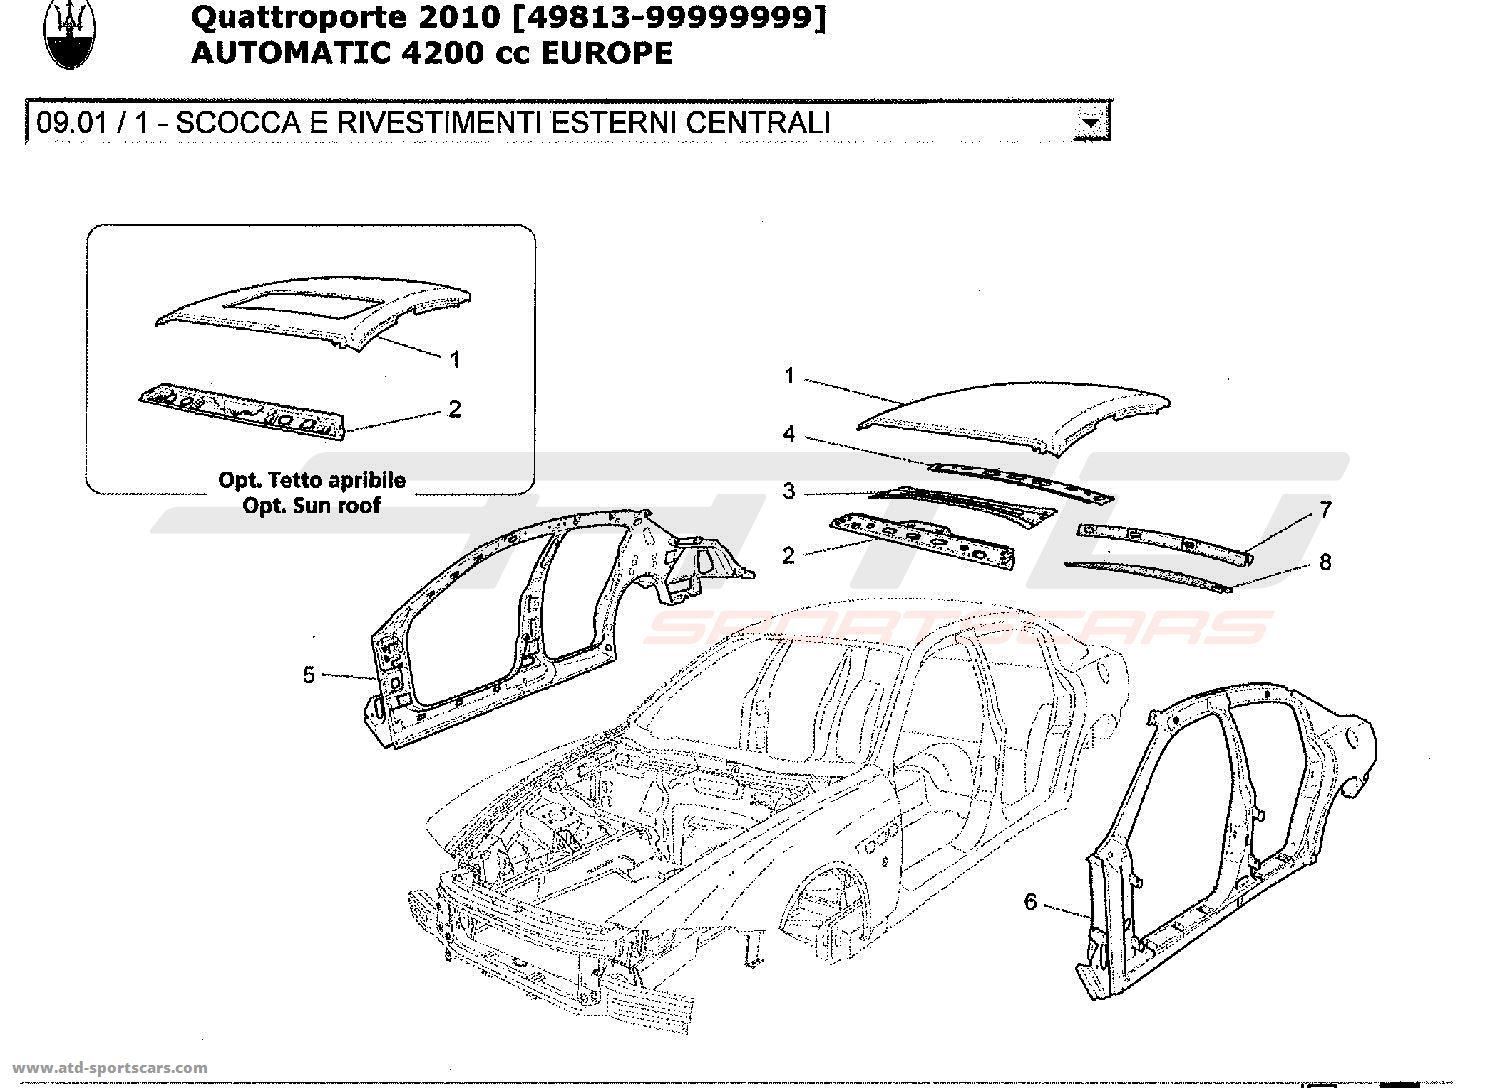 BODYWORK AND CENTRAL OUTER TRIM PANELS